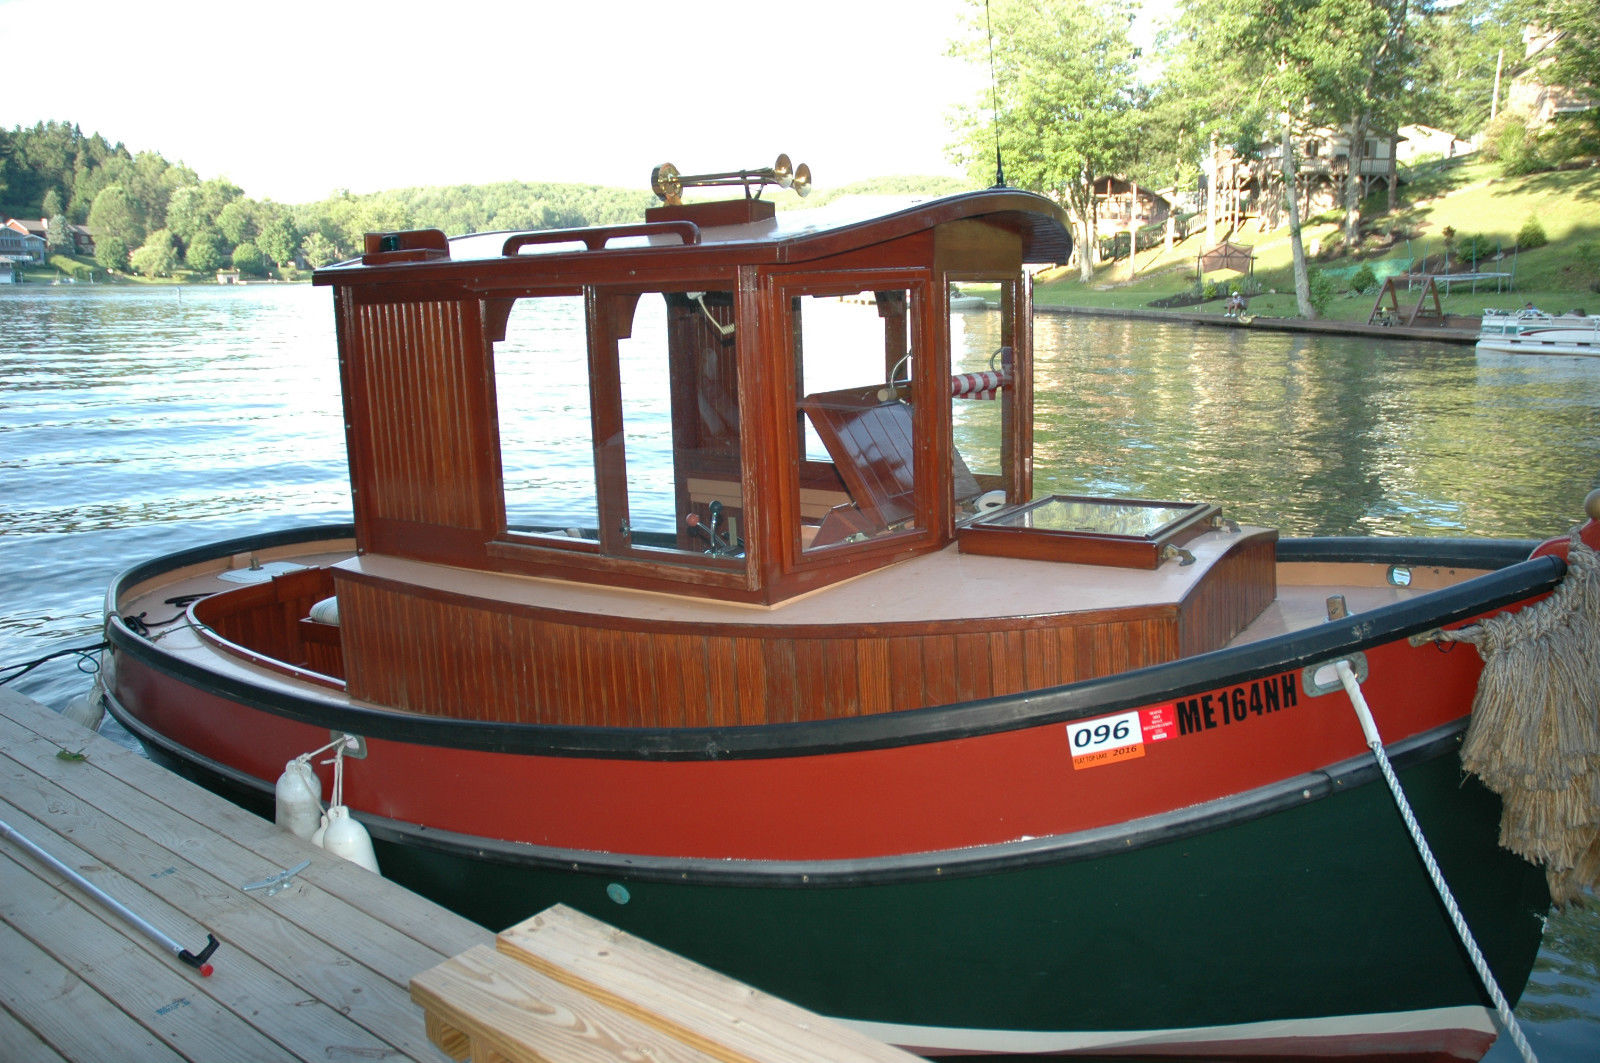 Mini Tugboat for sale started from $10 000